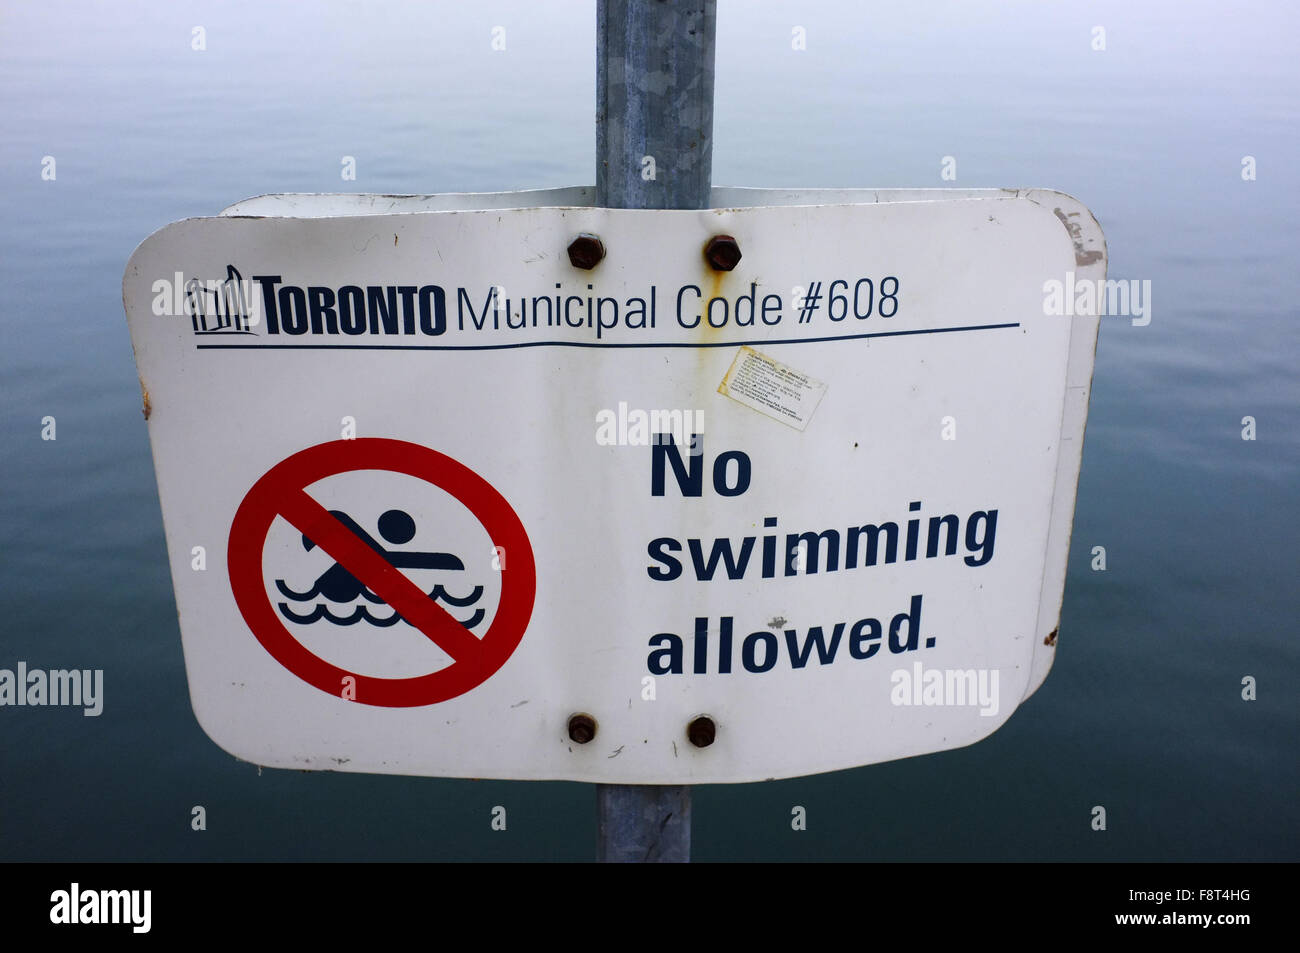 A No swimming allowed sign in the East Bayfront area of Toronto. Stock Photo